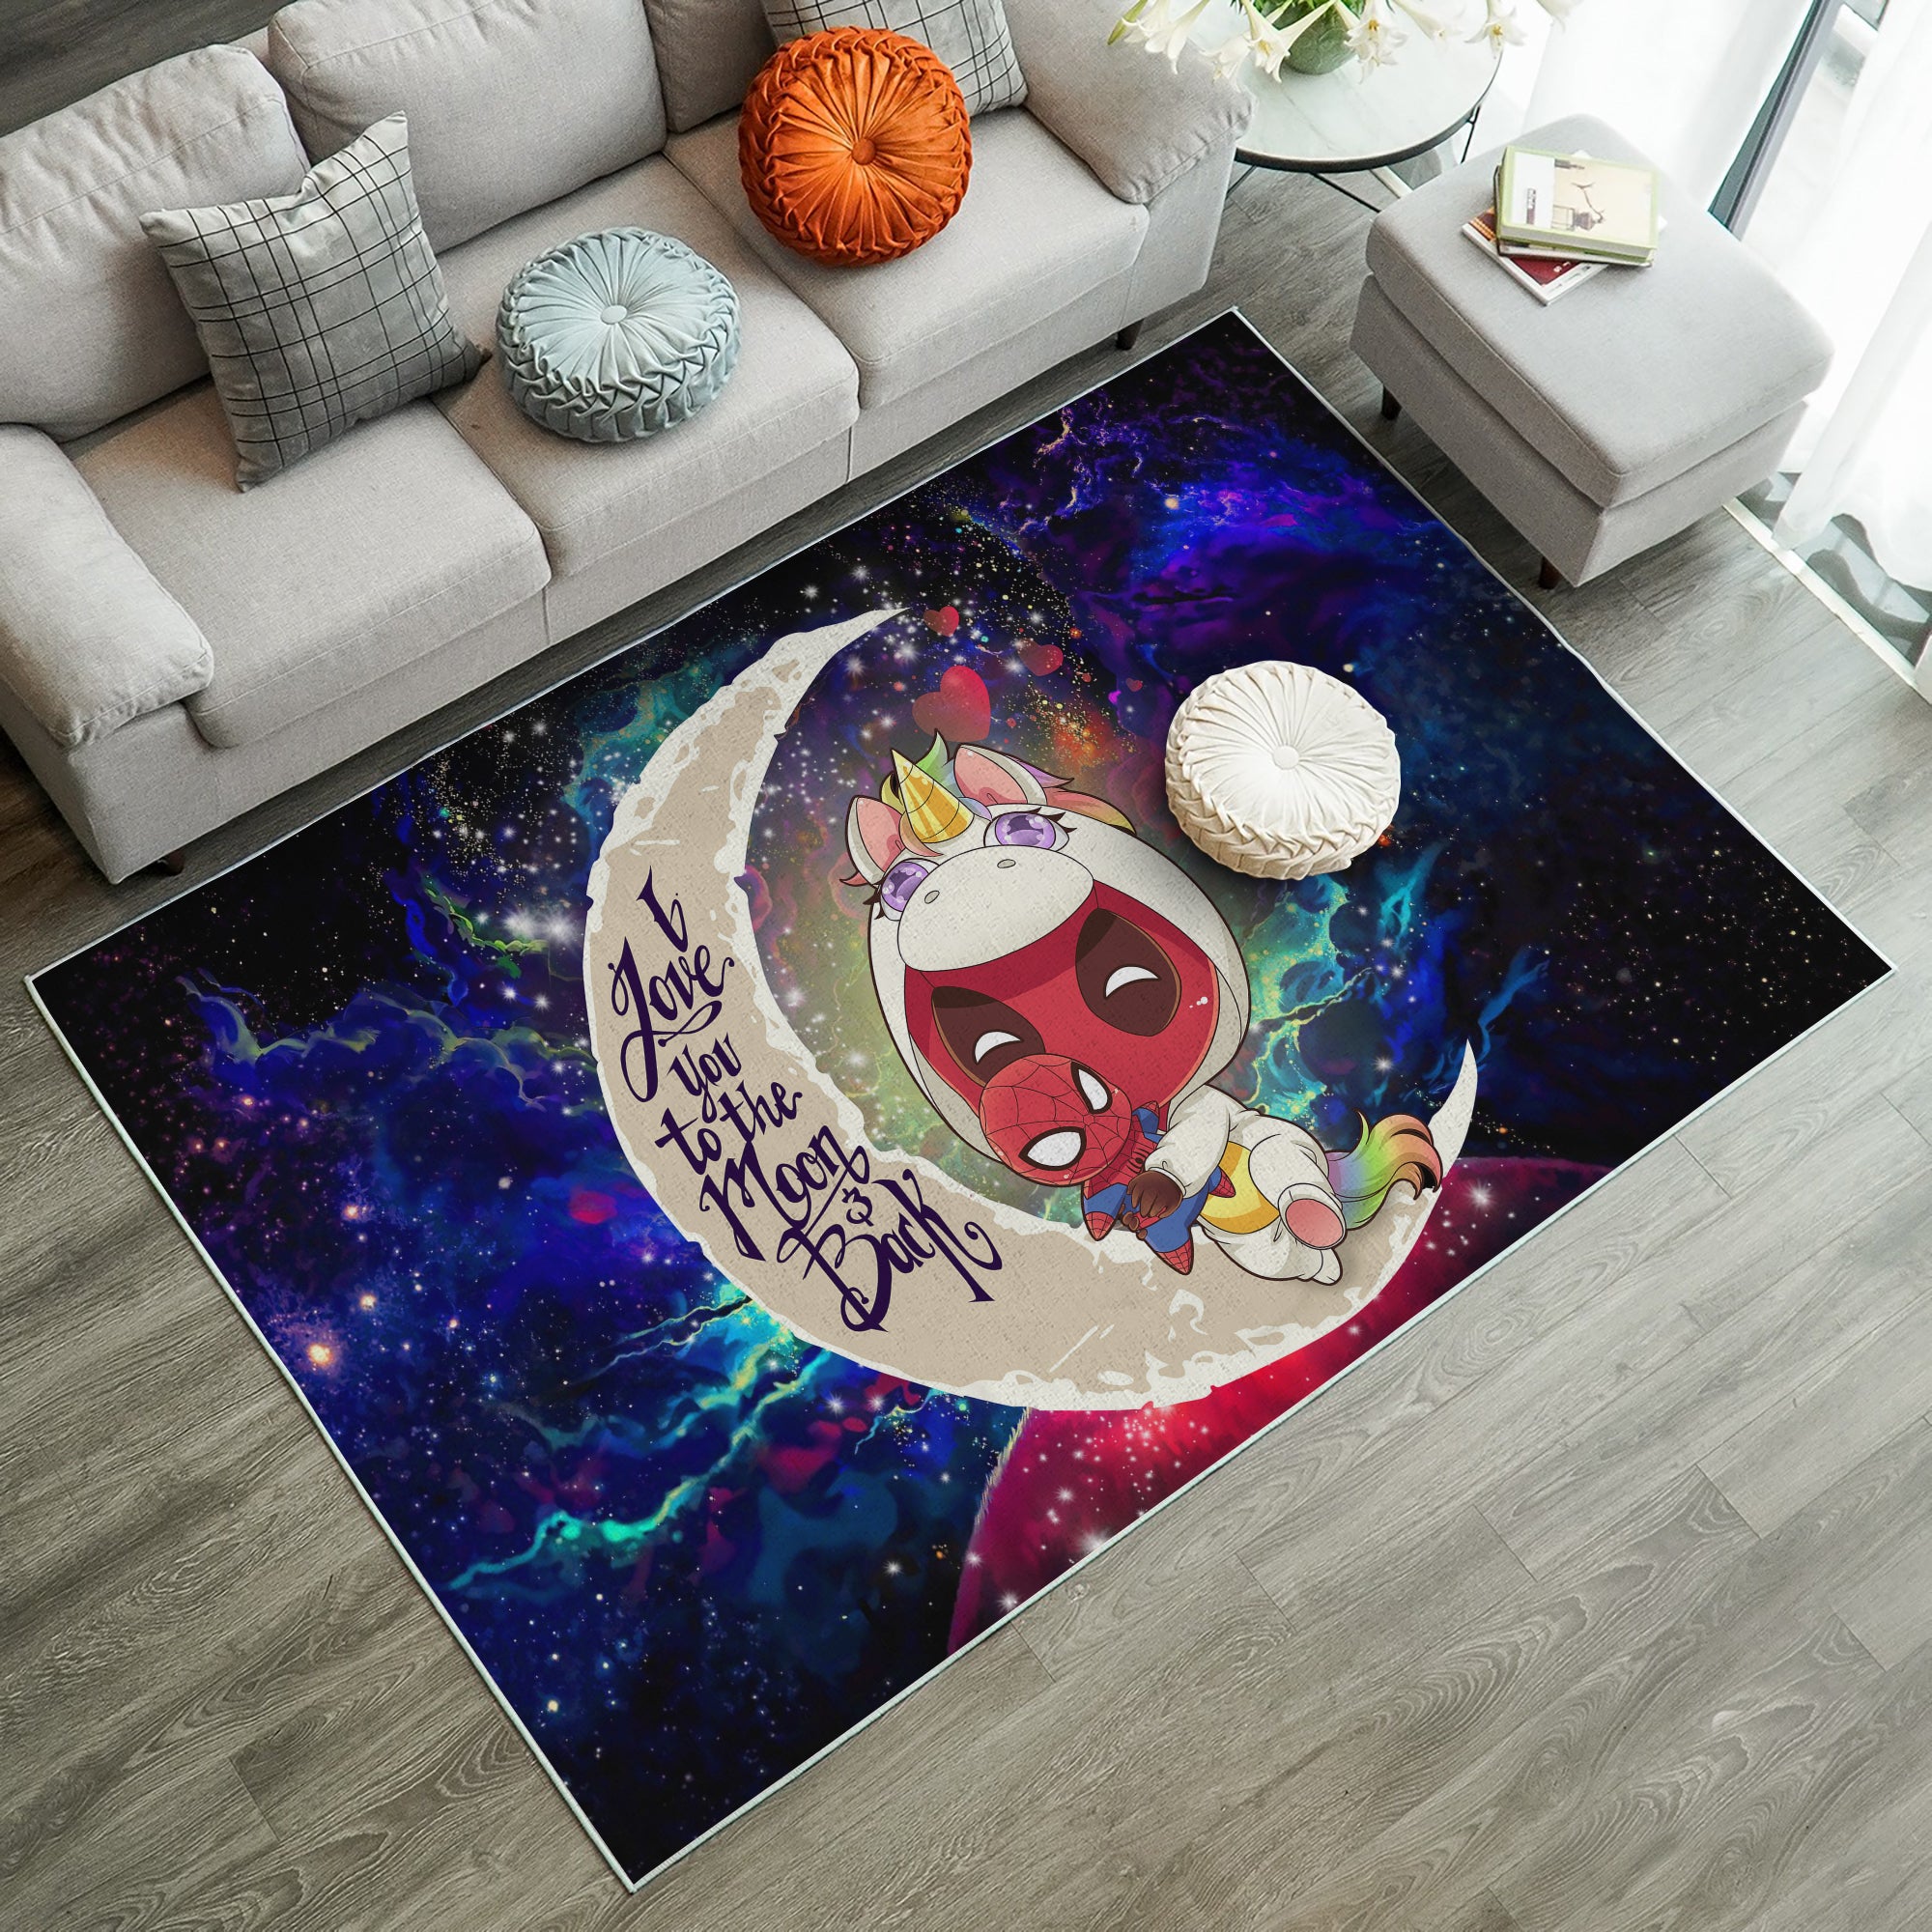 Unicorn Deadpool And Spiderman Avenger Love You To The Moon Galaxy Carpet Rug Home Room Decor